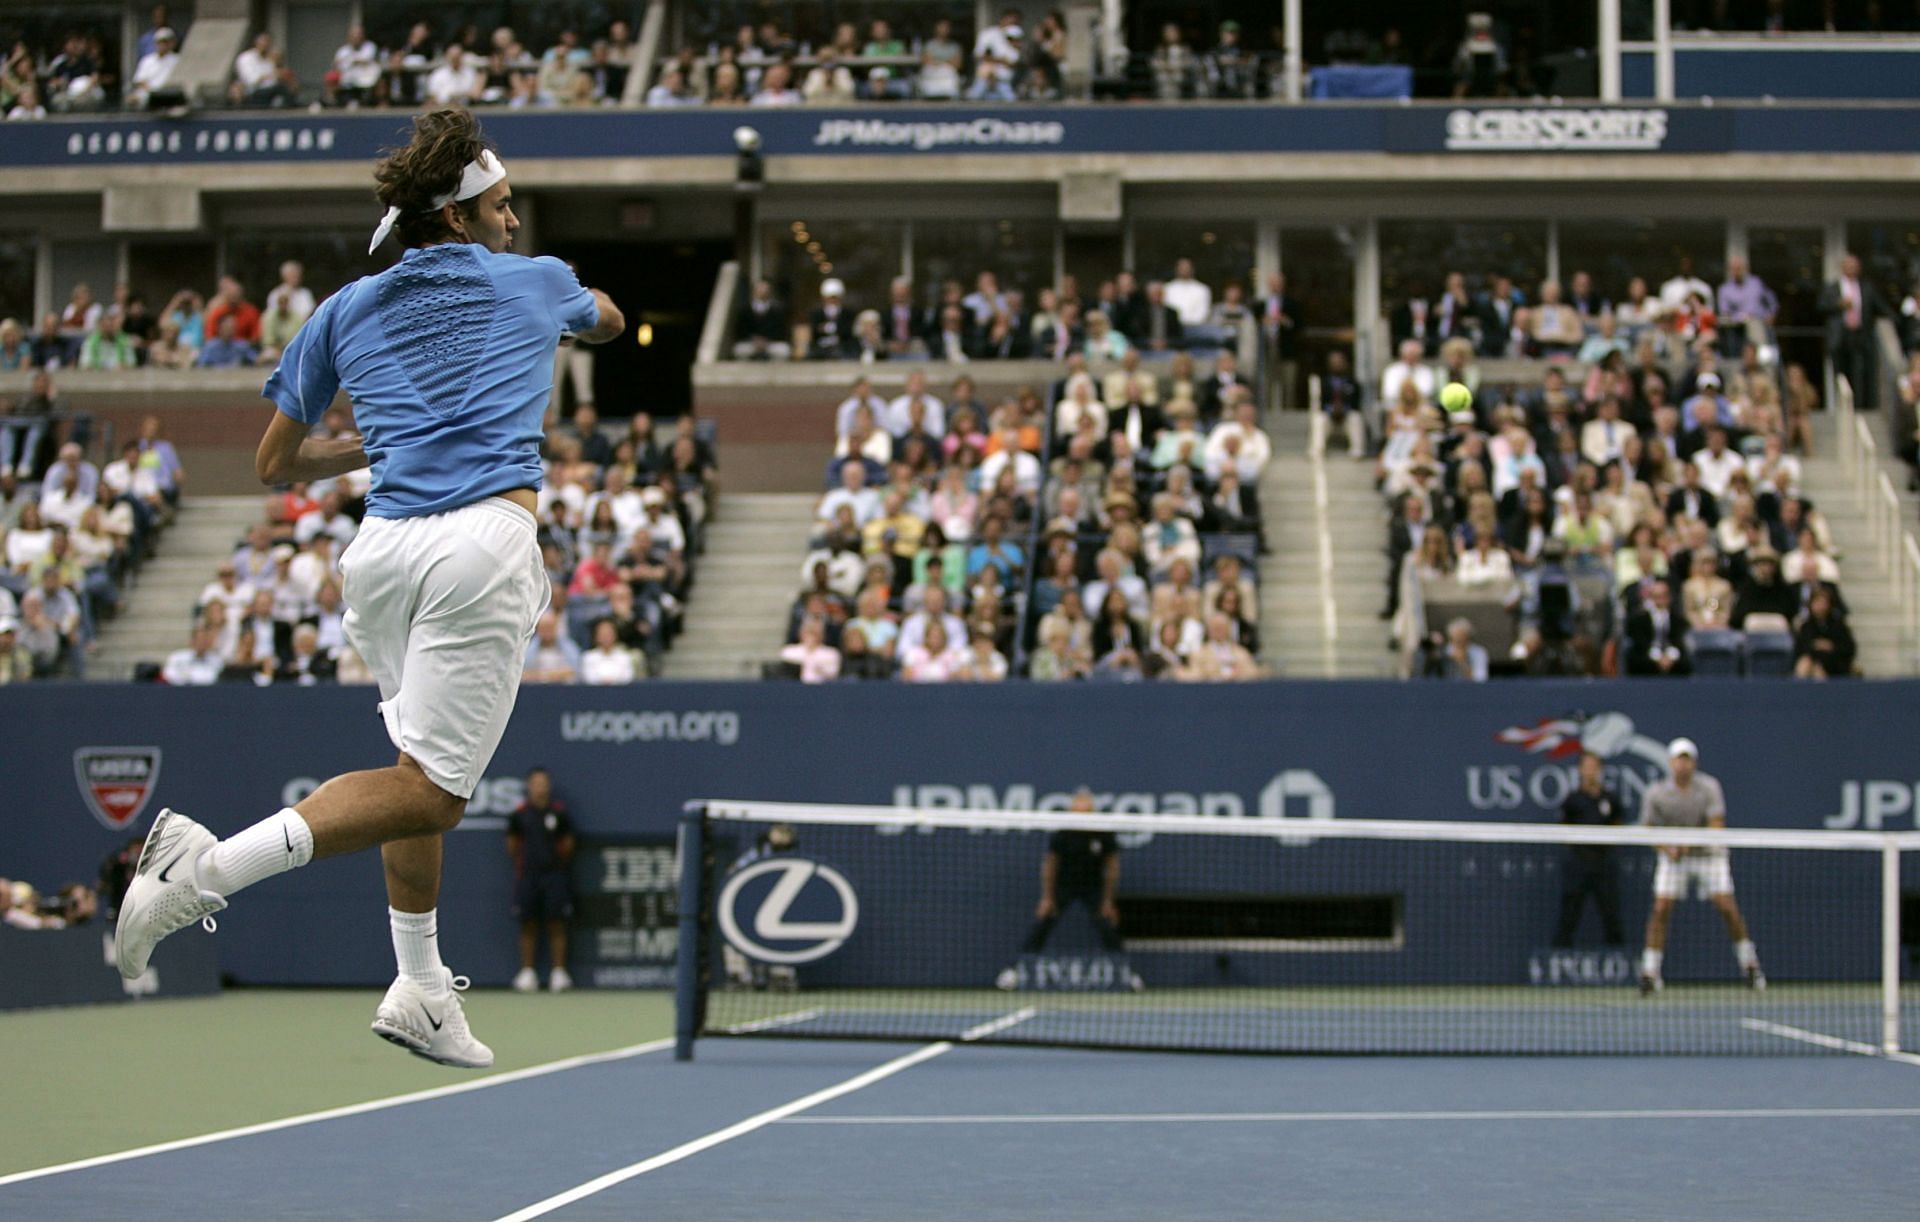 Roger Federer in action at the US Open against Andy Roddick